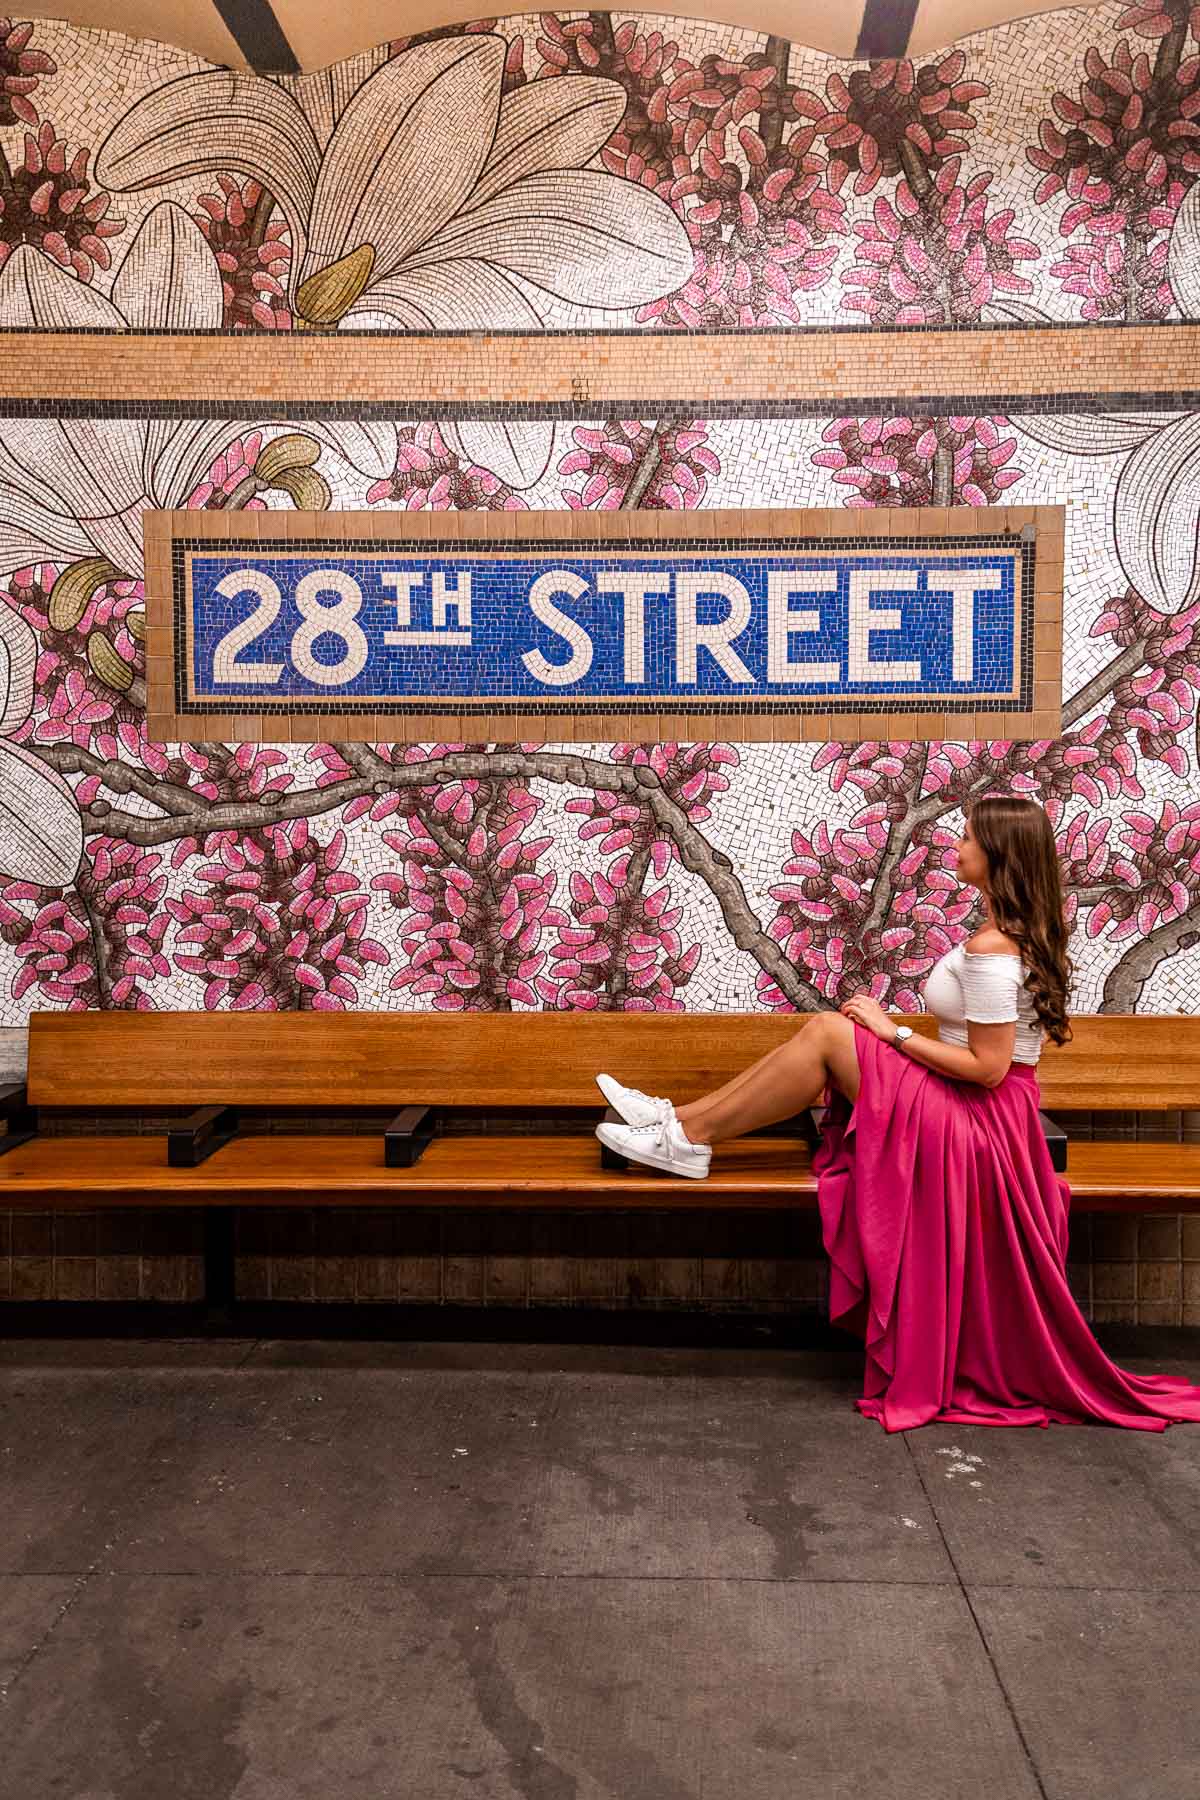 Girl in pink skirt sitting under a Flower mural at 28th Street Subway Station, New York